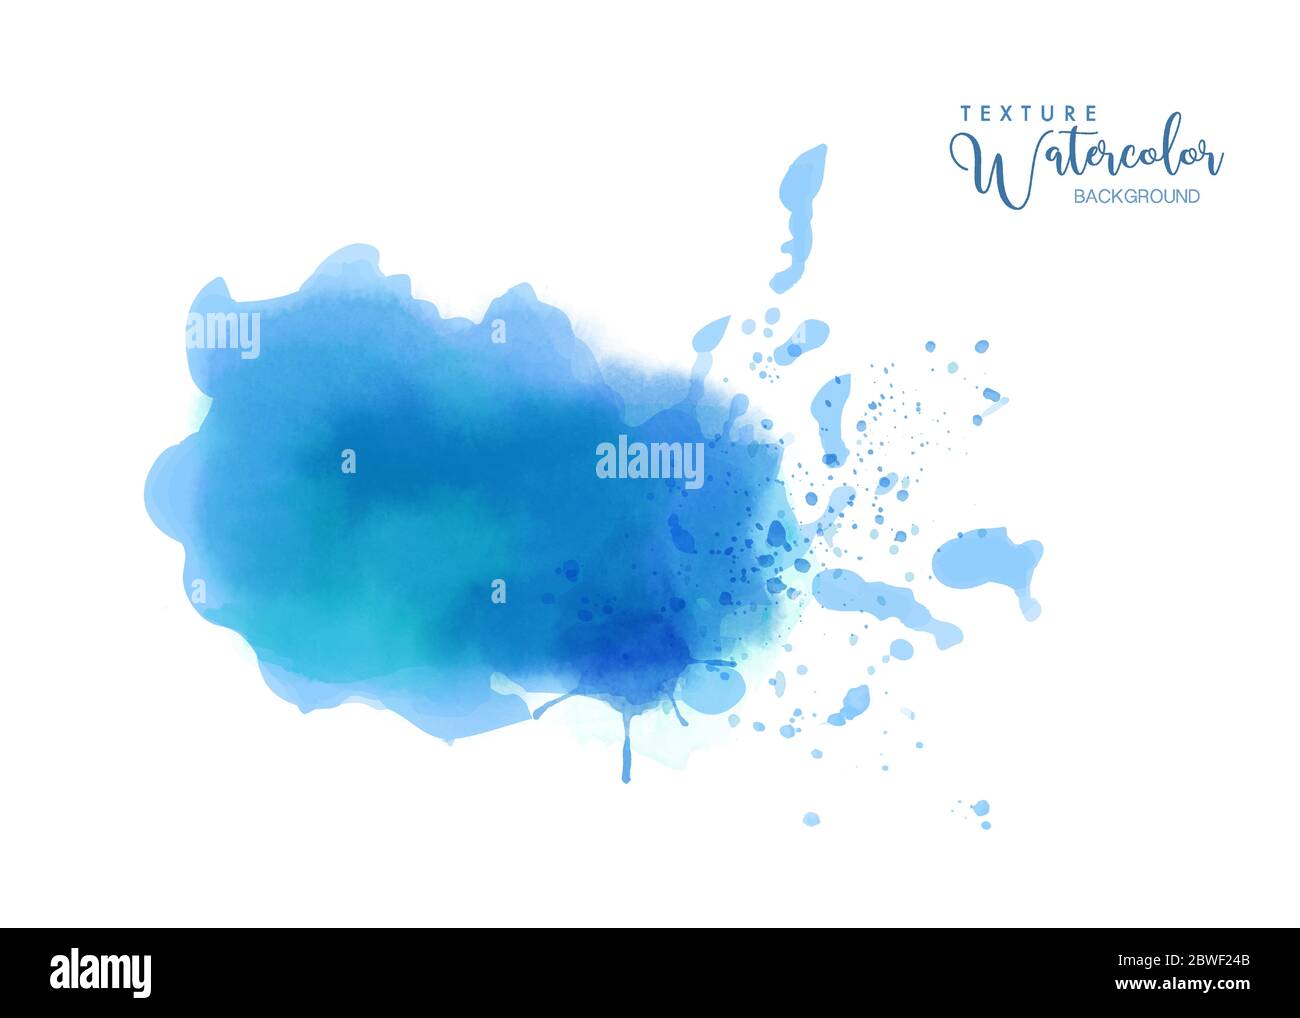 Abstract isolated blue bright watercolor stain. Grunge texture artistic vector used as being an element in the decorative design of invitation, cards, Stock Vector